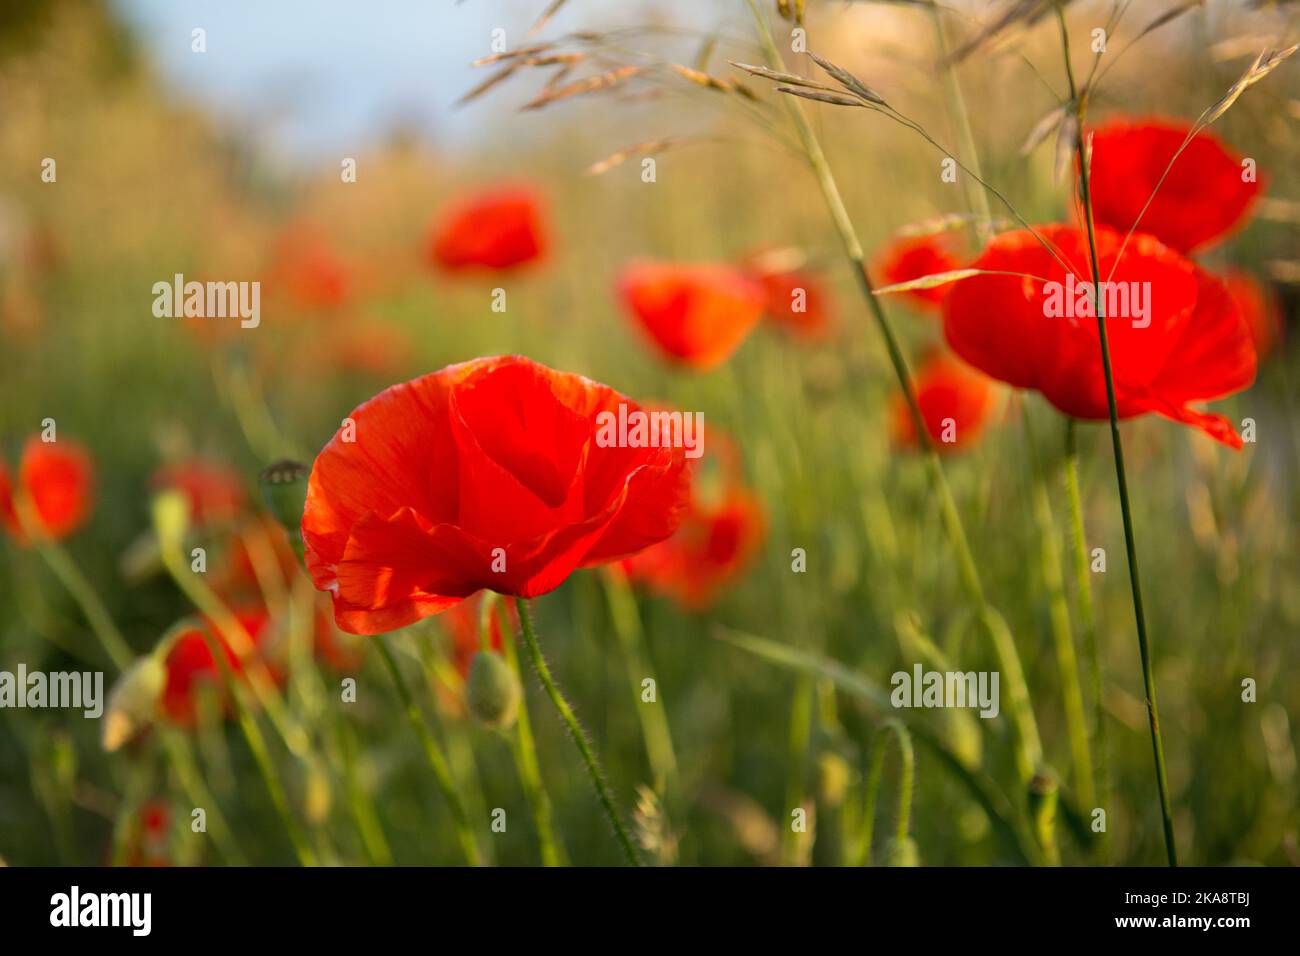 Red poppy flowers on a meadow Stock Photo